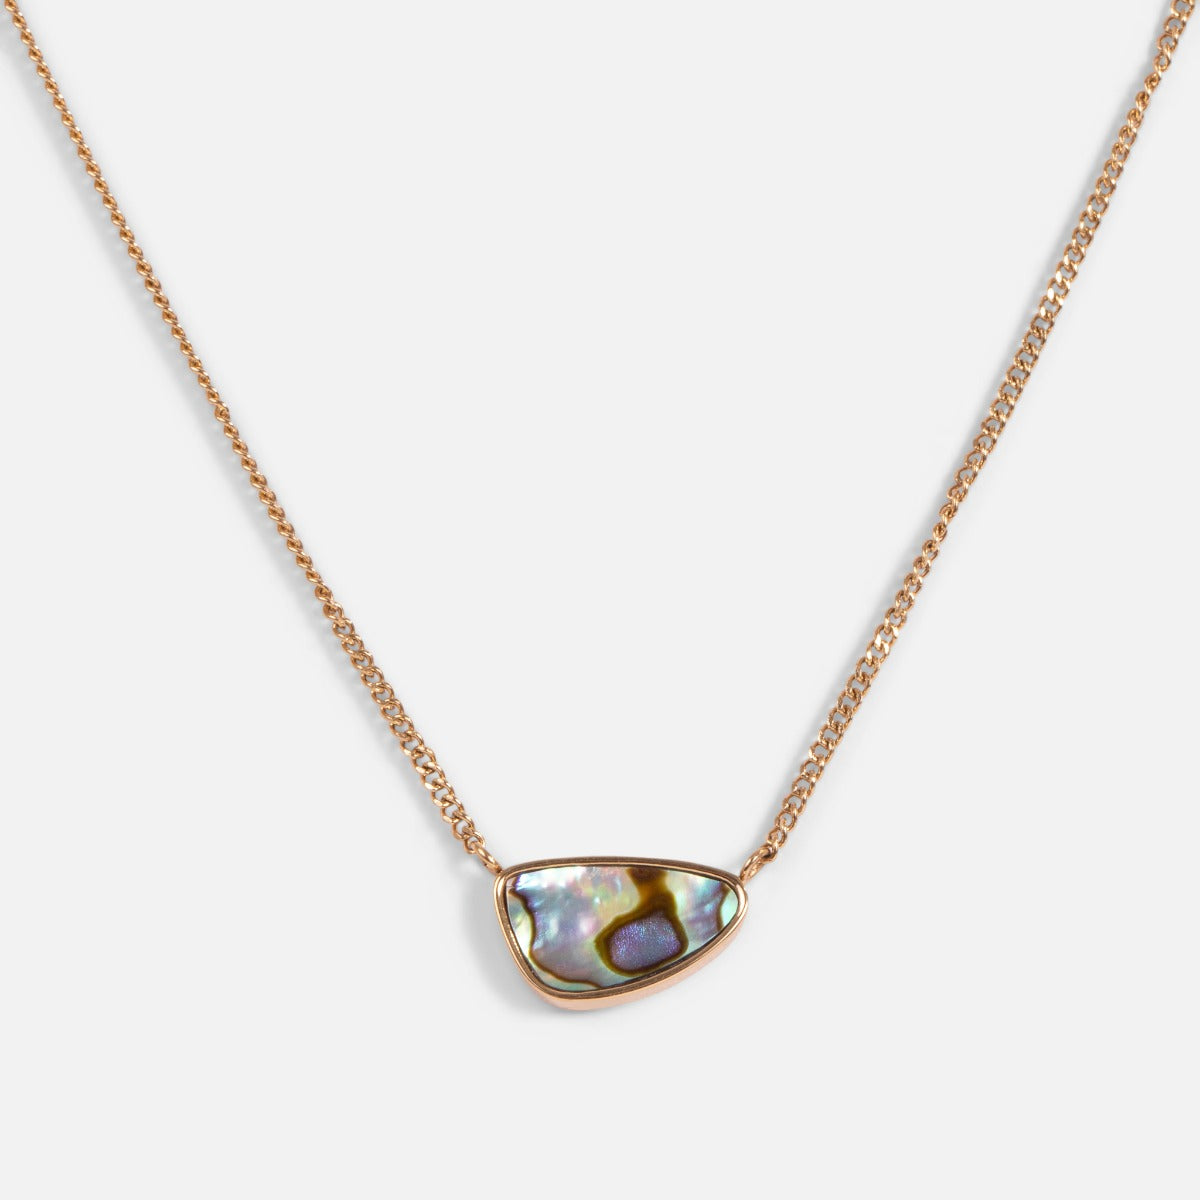 20 inches golden stainless steel necklace with abalone stone 